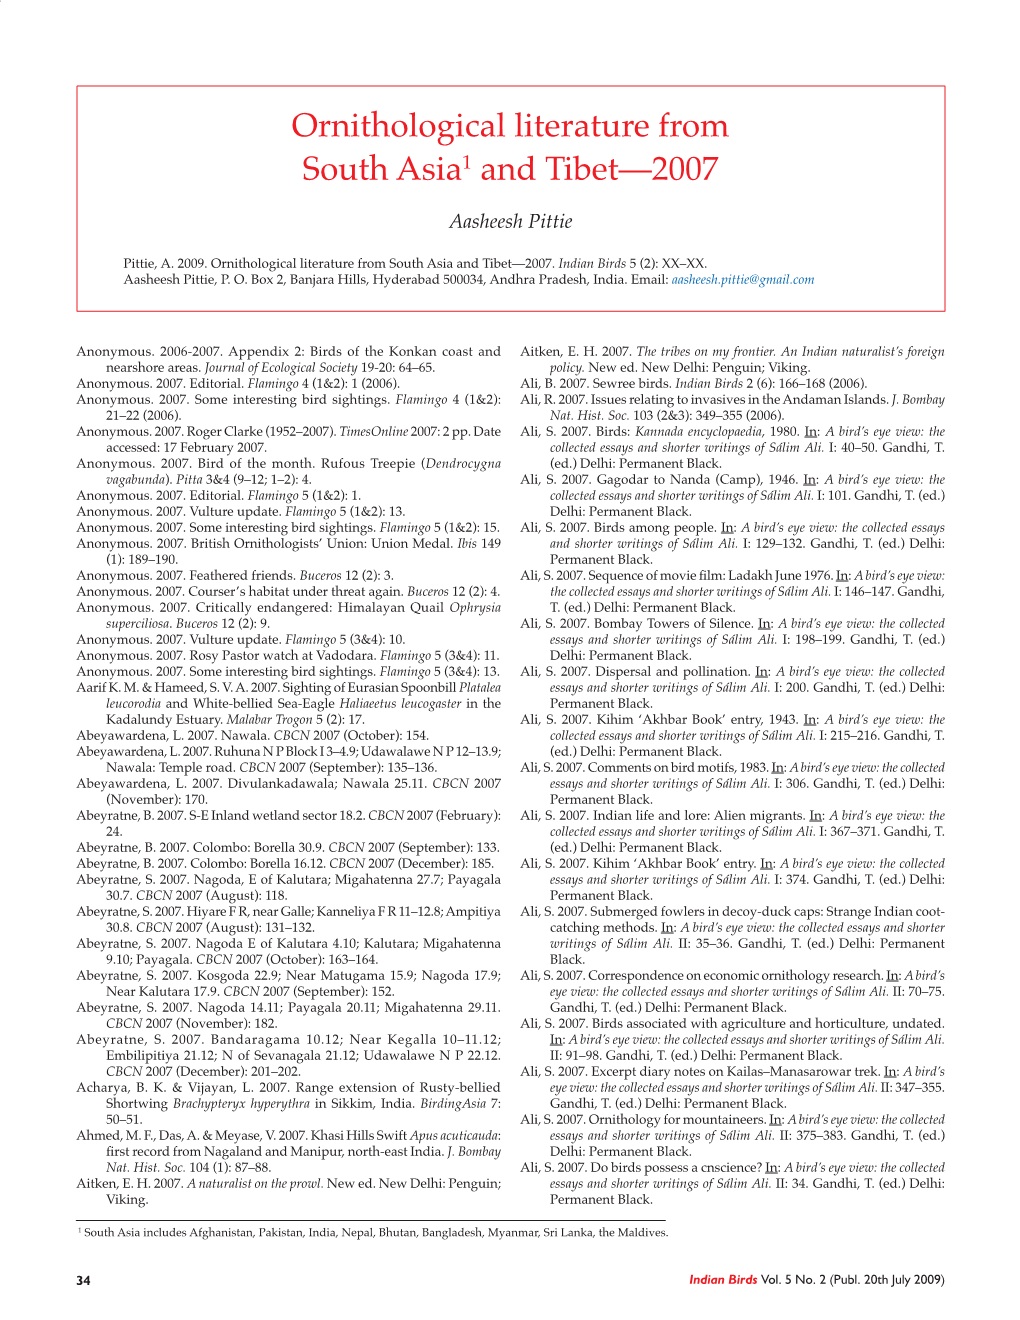 Ornithological Literature from South Asia1 and Tibet—2007